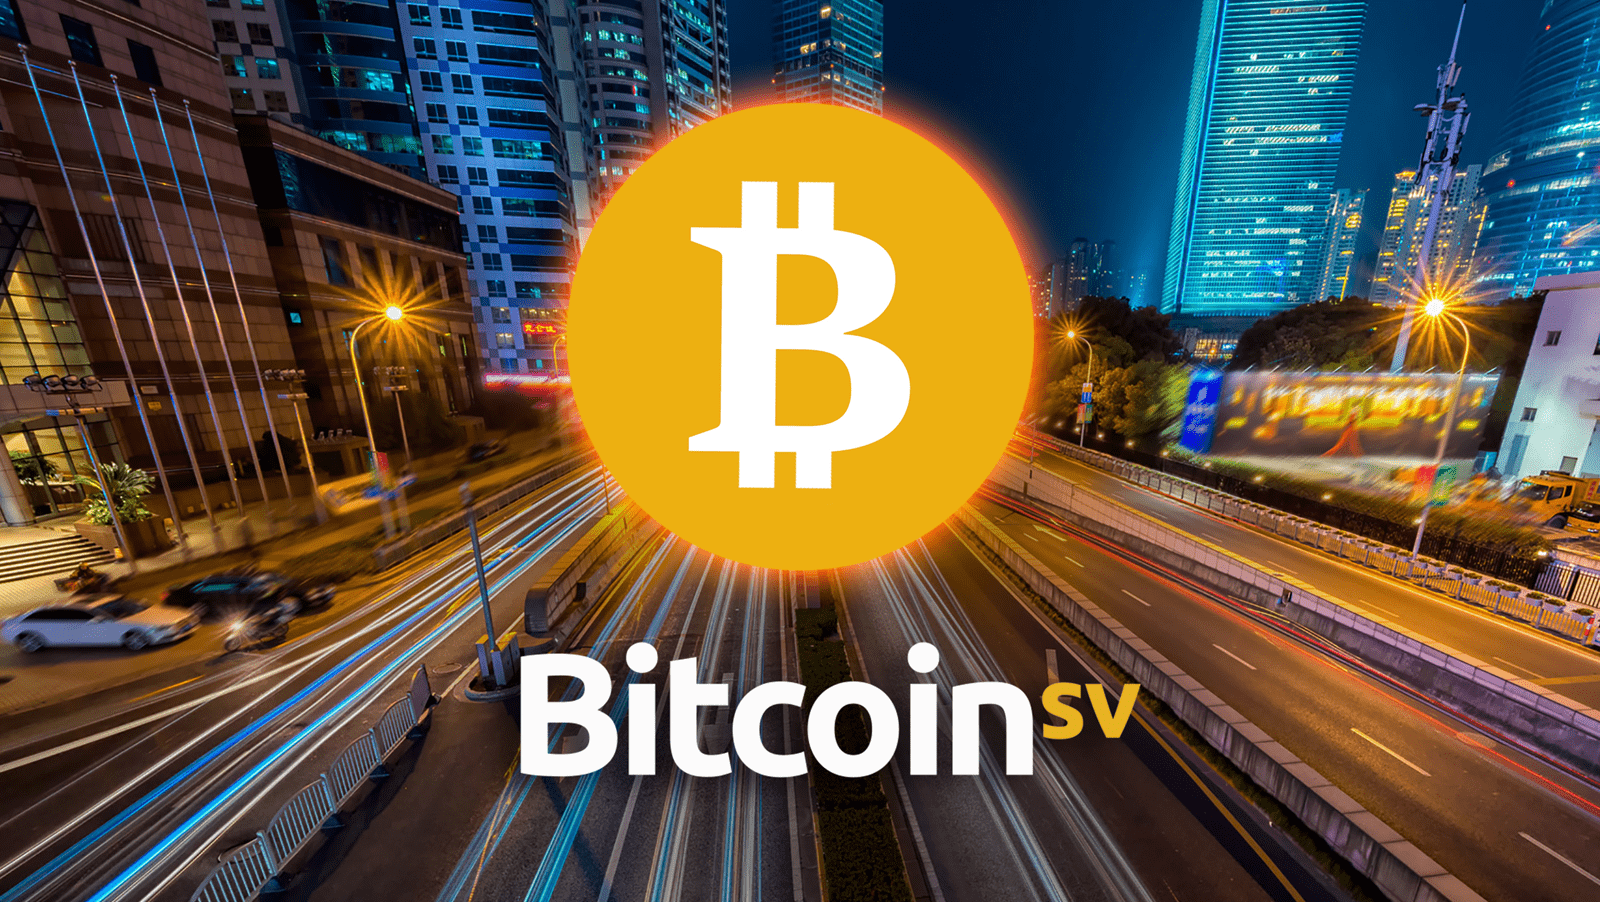 Bodog now accepting Bitcoin SV for deposits and withdrawals